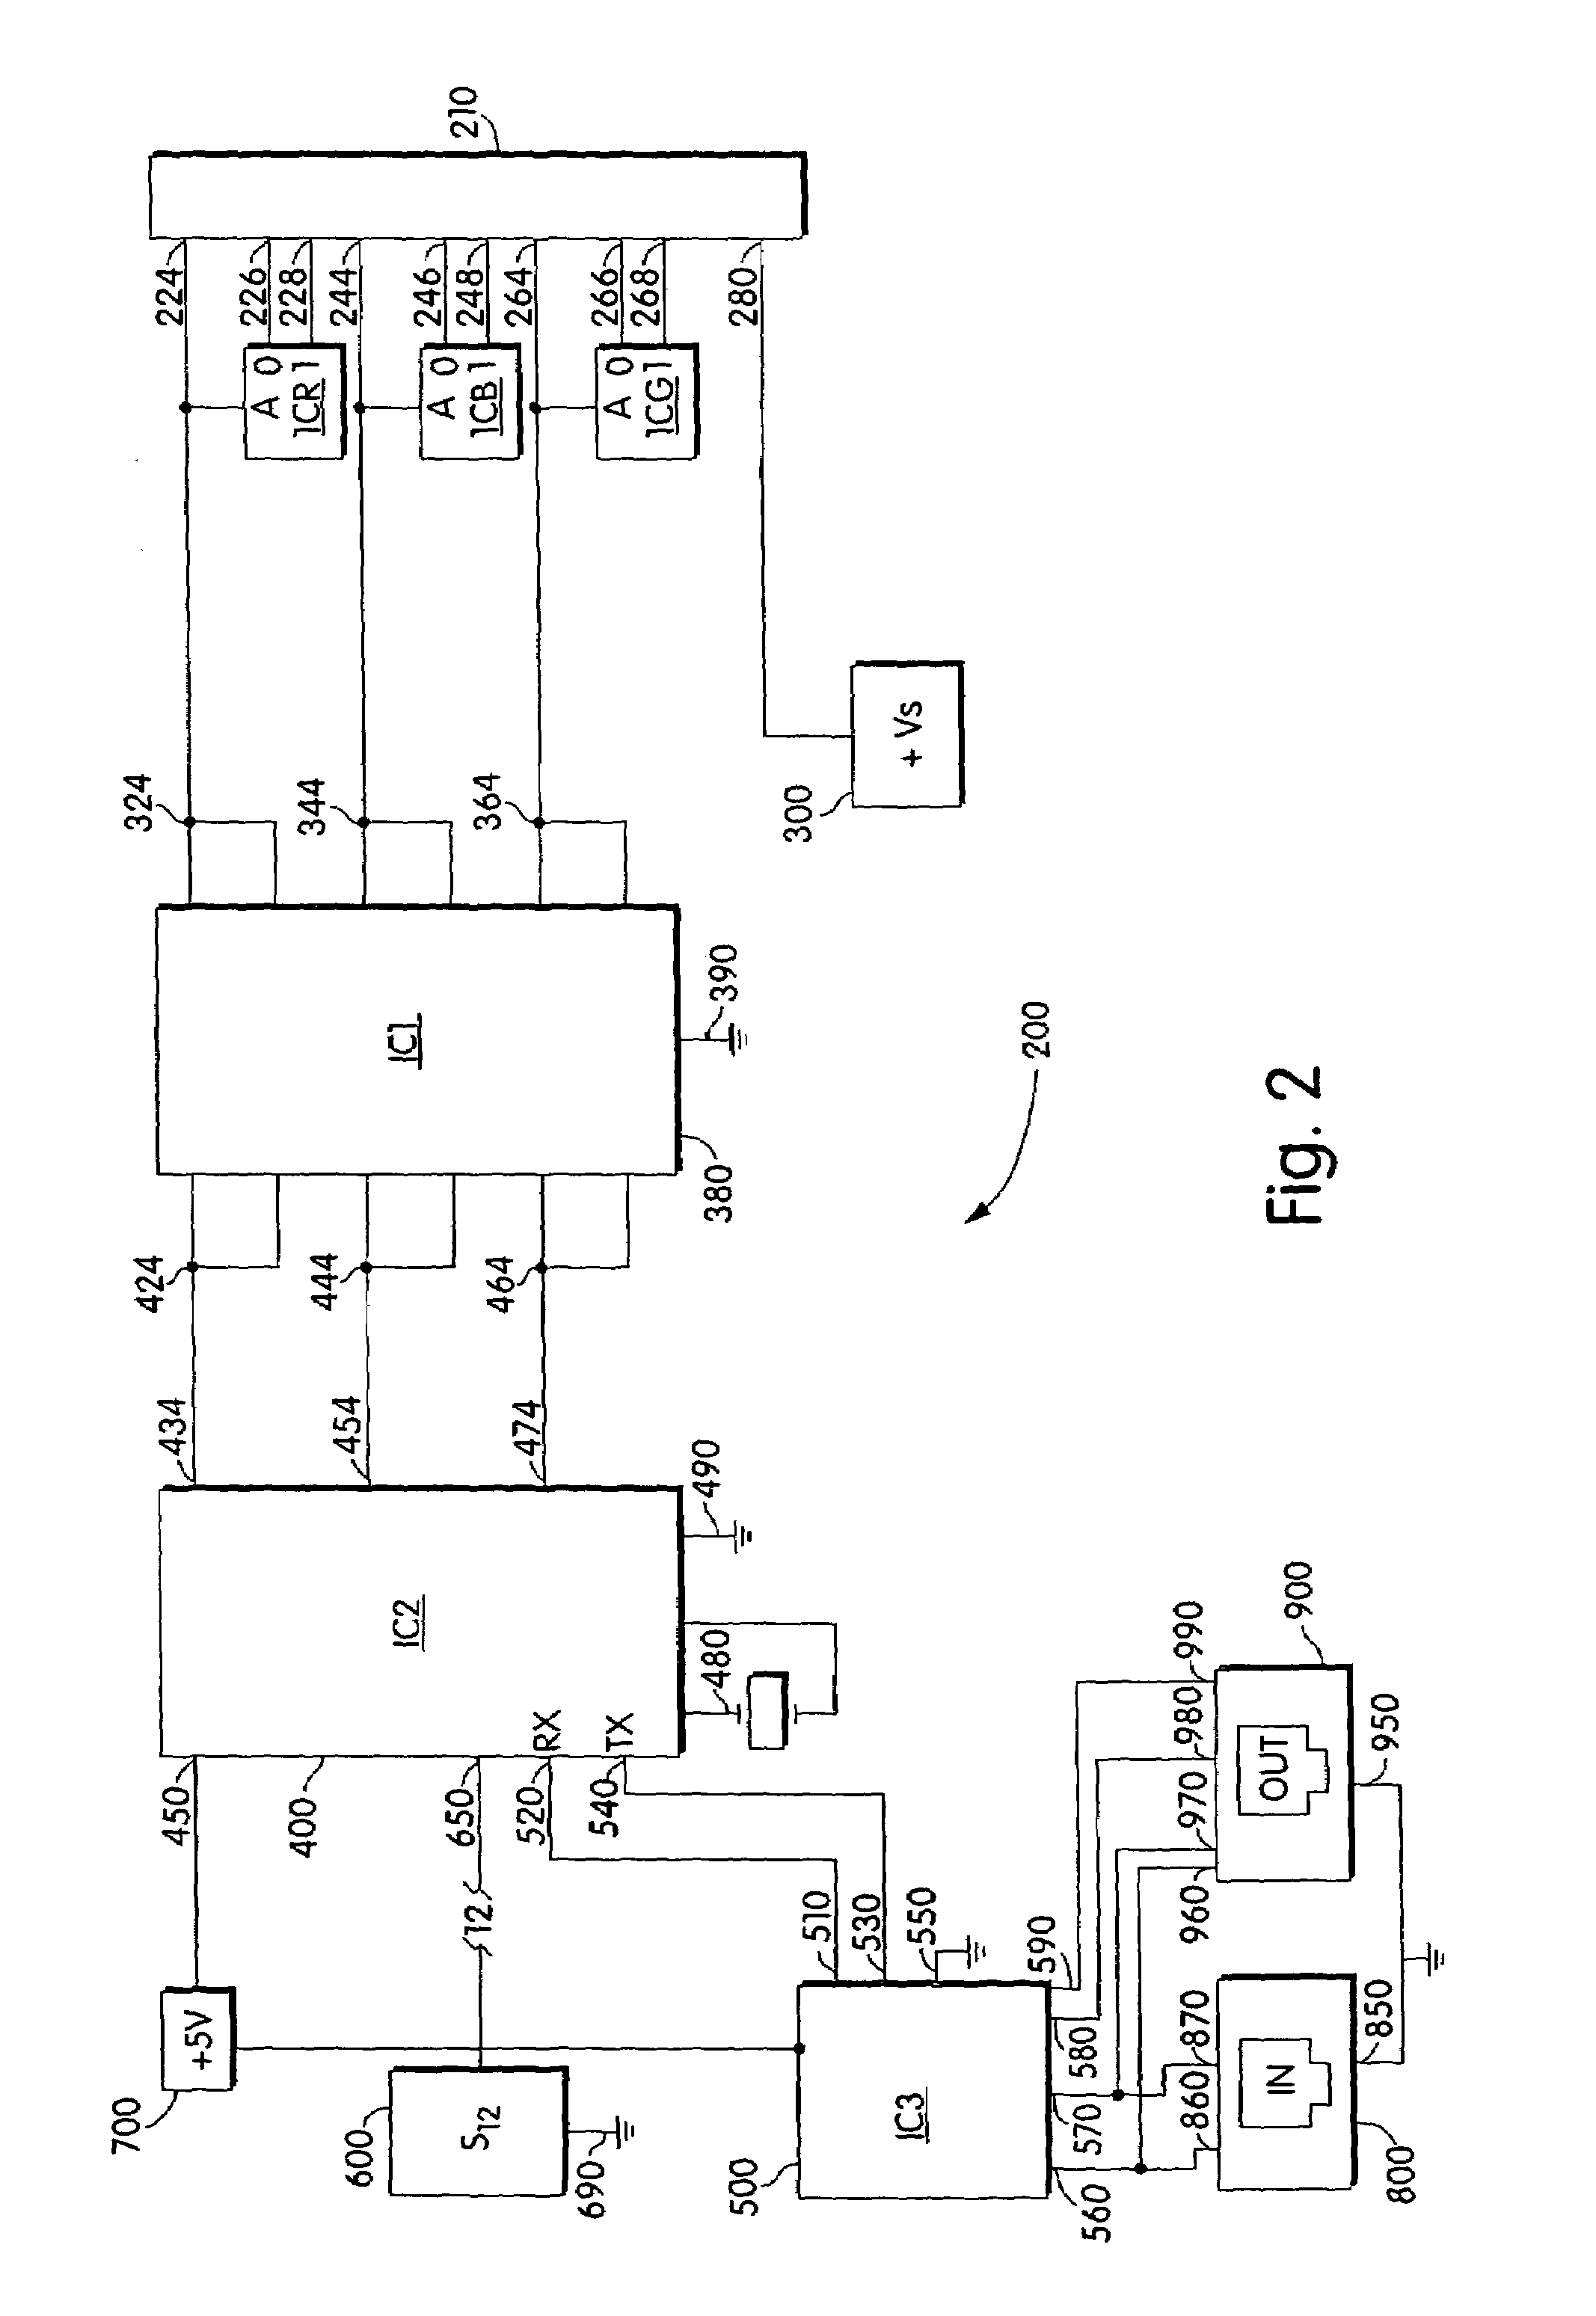 Multicolored LED lighting method and apparatus